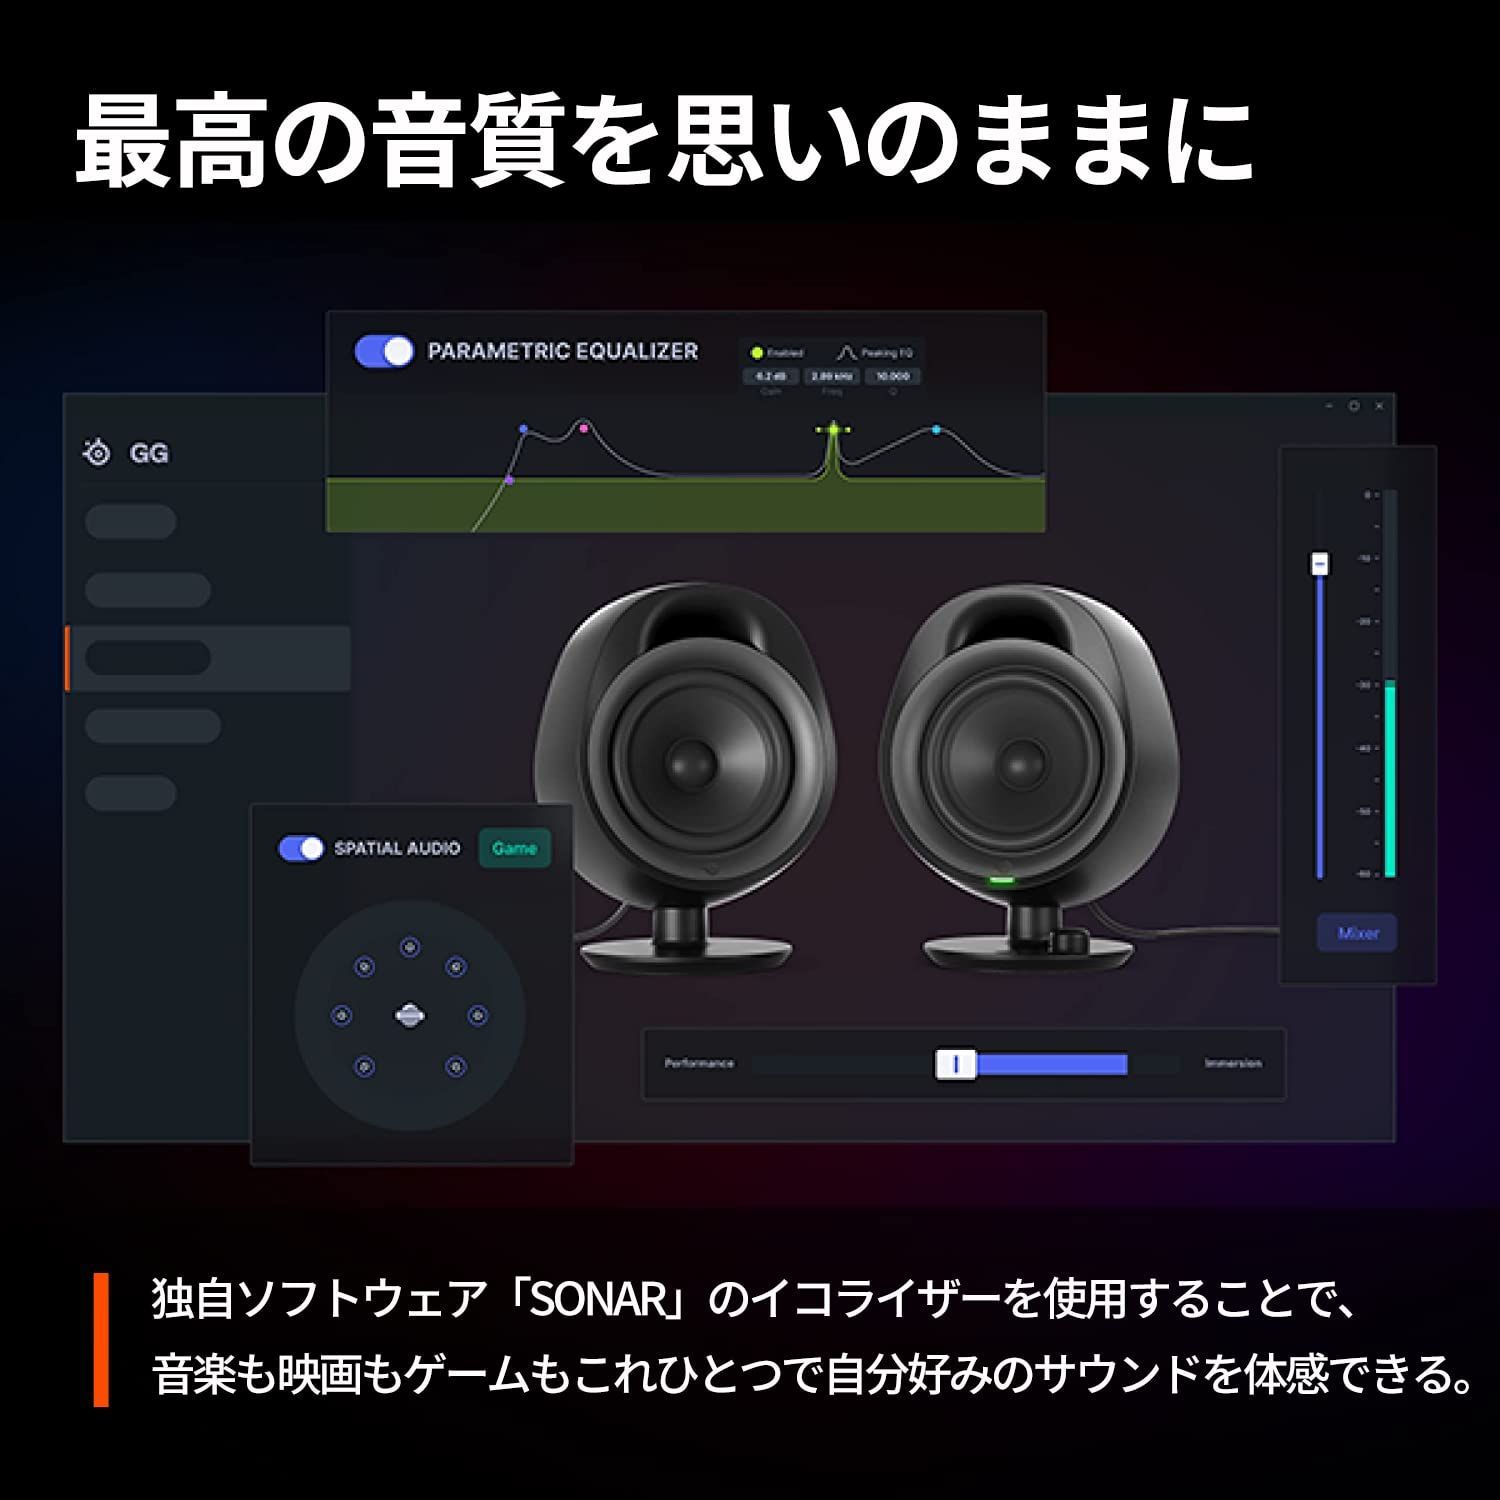 STEELSERIES PCスピーカー ARENA 3 AUX BLUETOOTH 重低音 バスレフ式